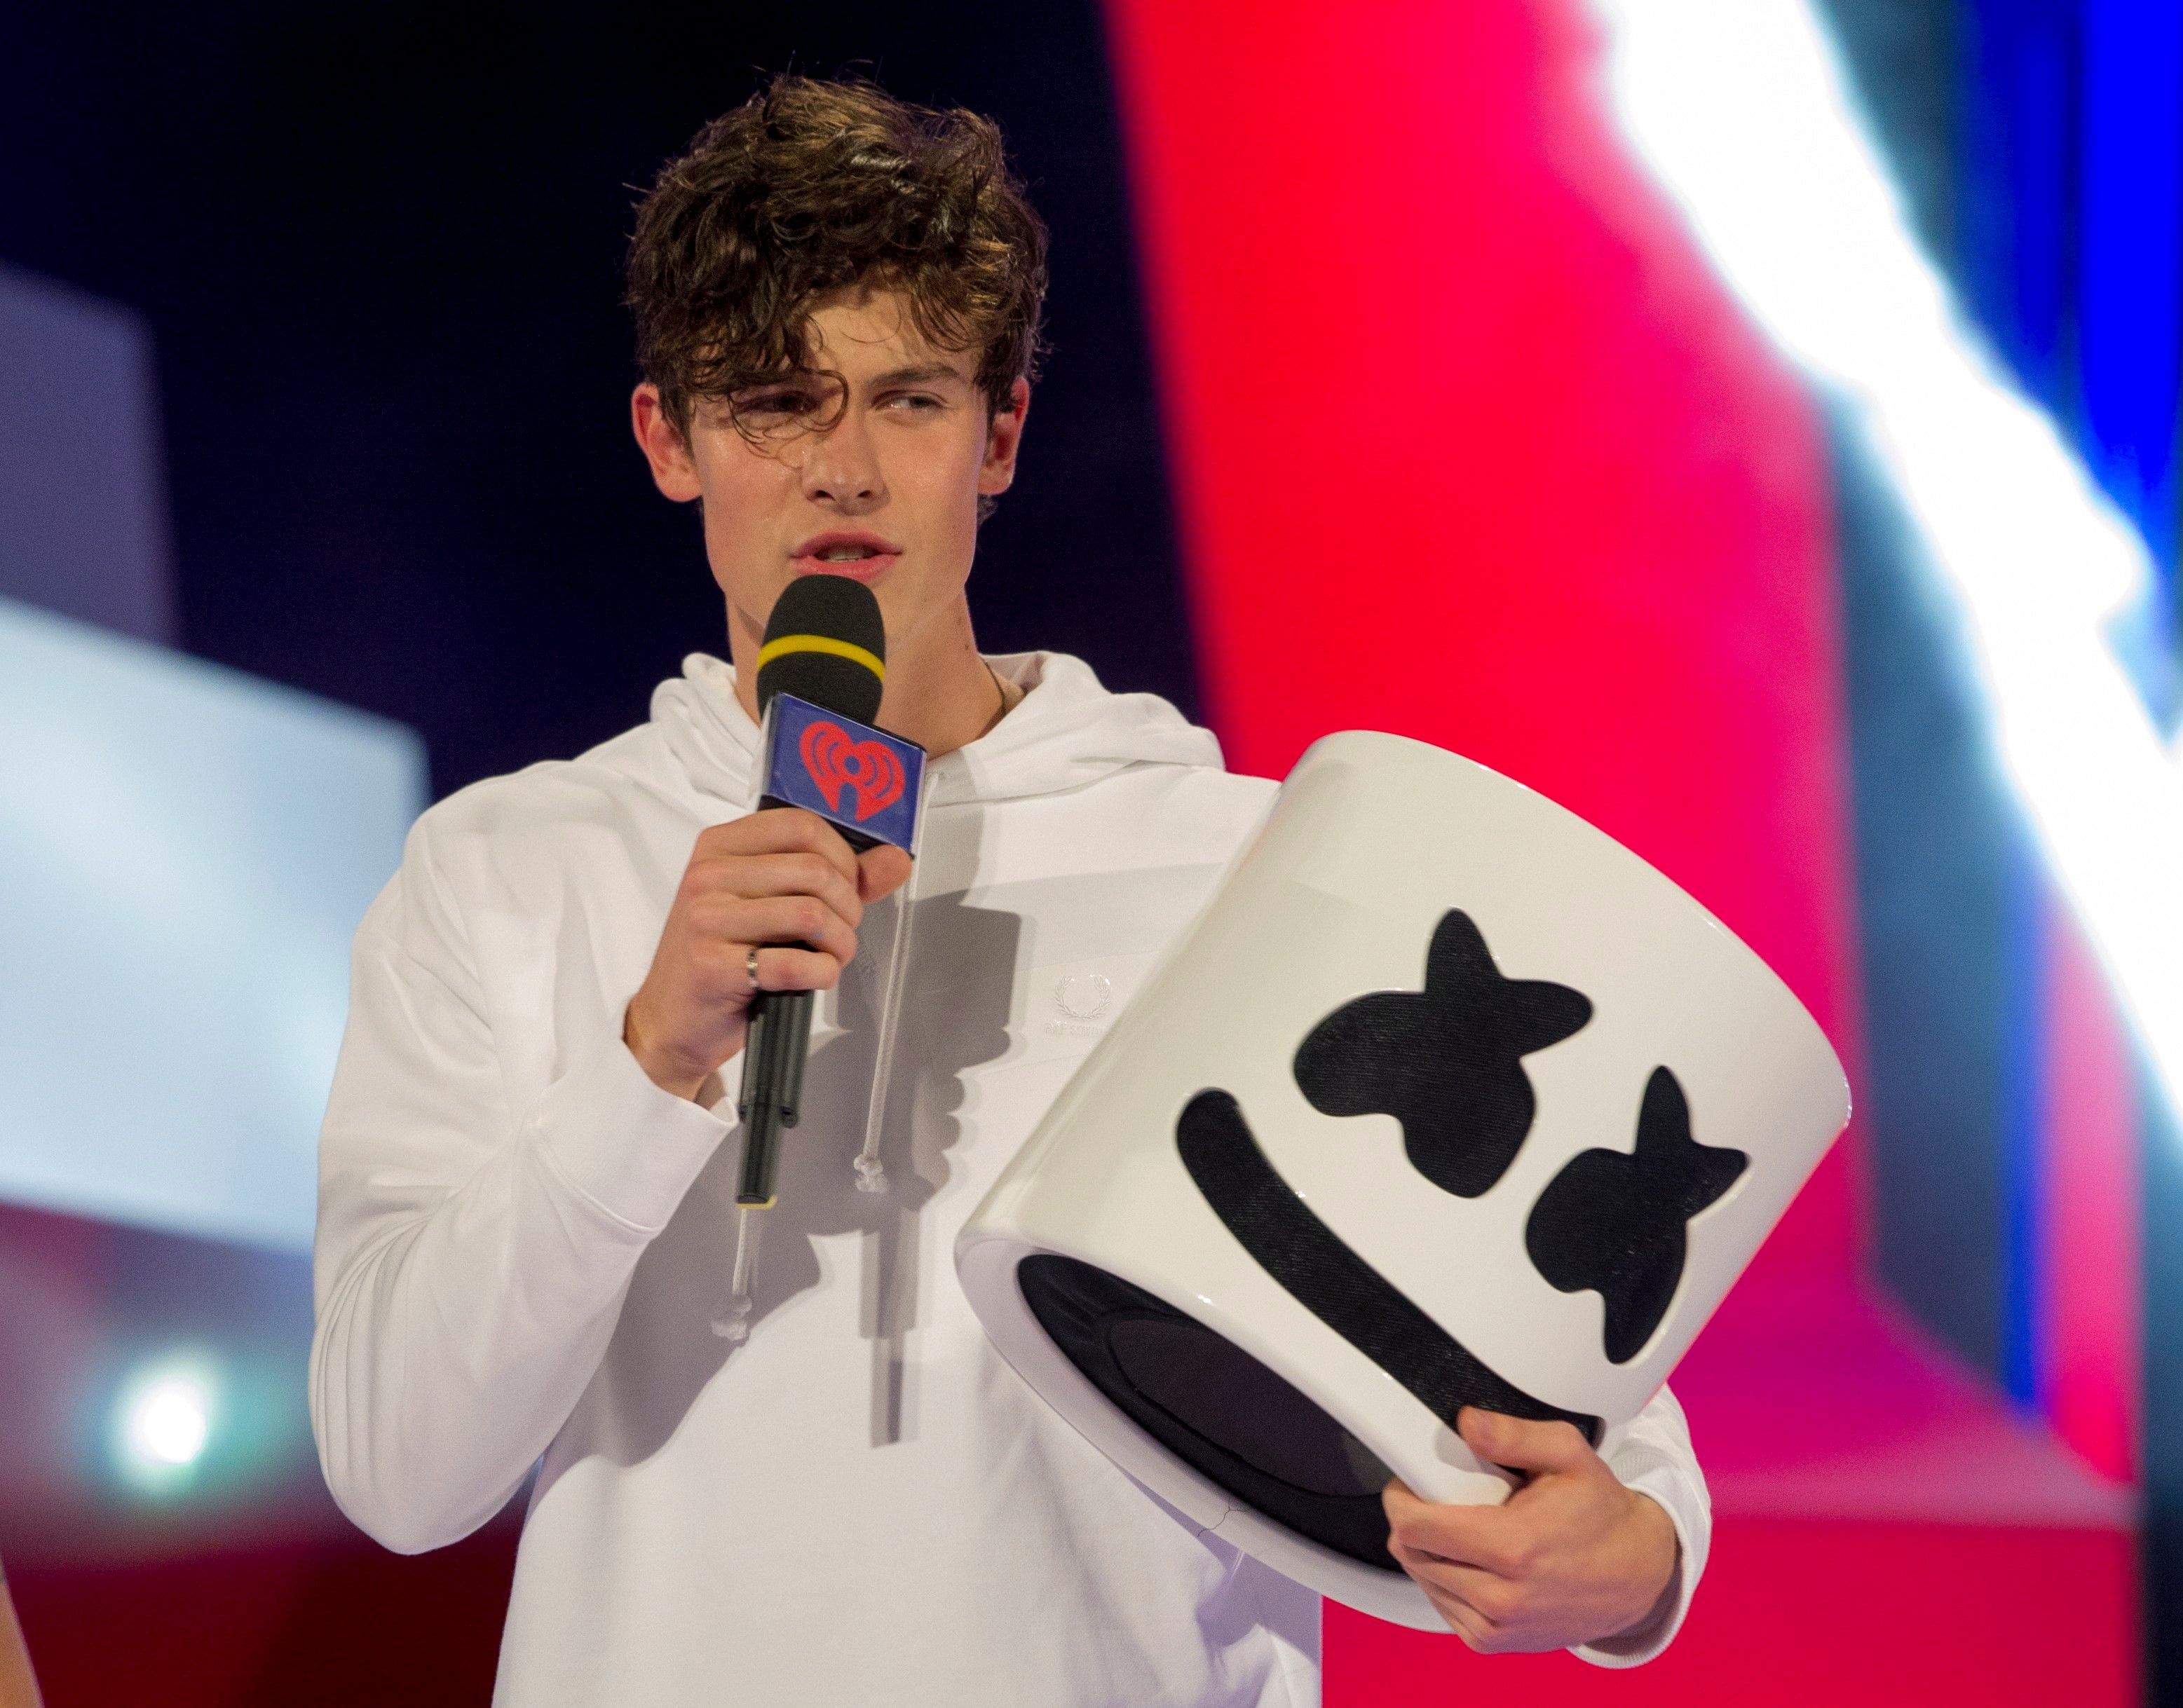 Shawn grabs awards, delivers big surprises at MMVAs - Globe and Mail